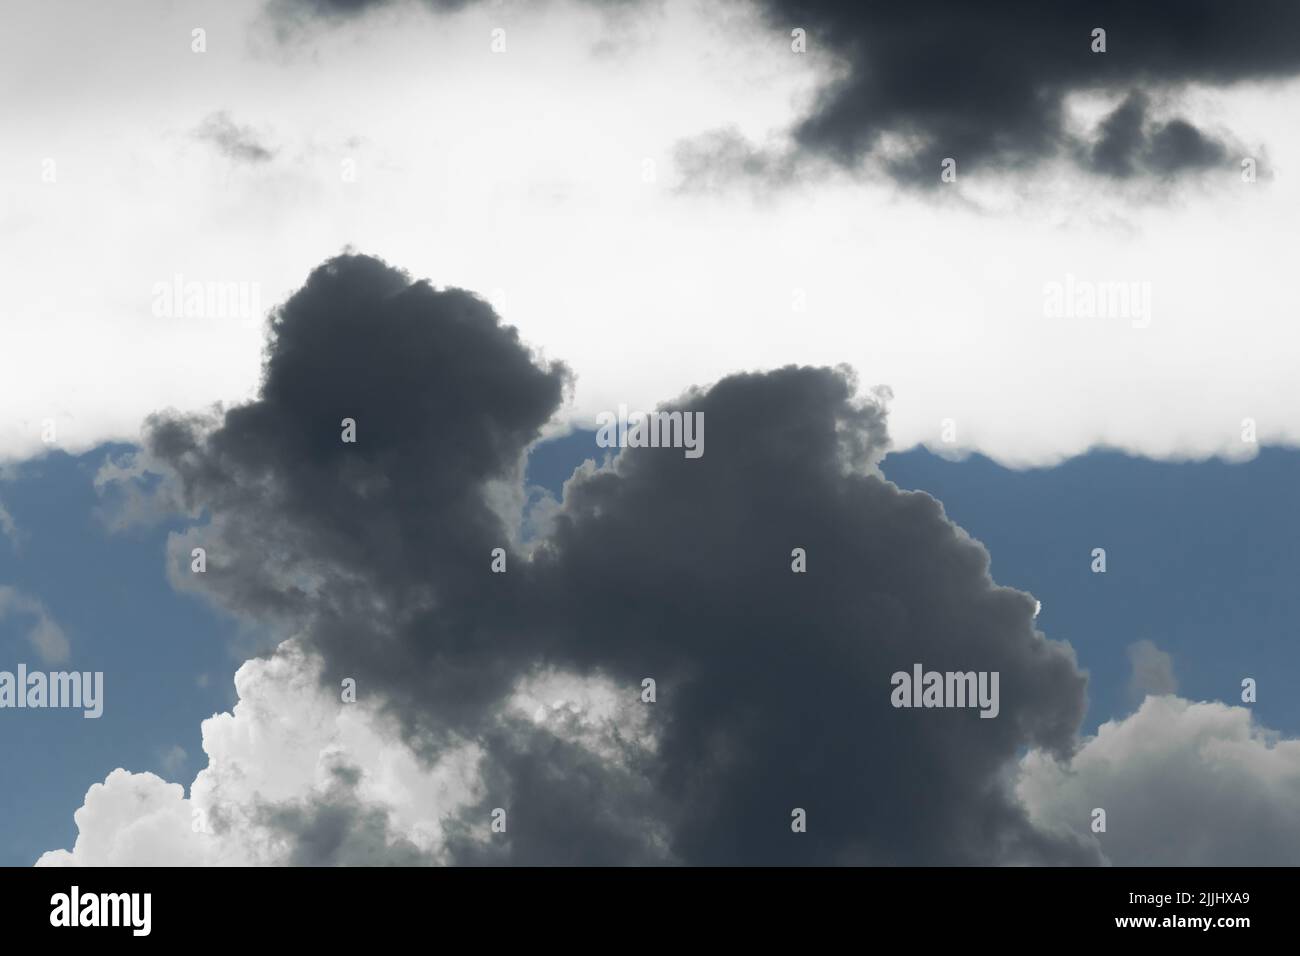 Sky dark rain clouds storm cloudy weather nature change weather background. Stock Photo